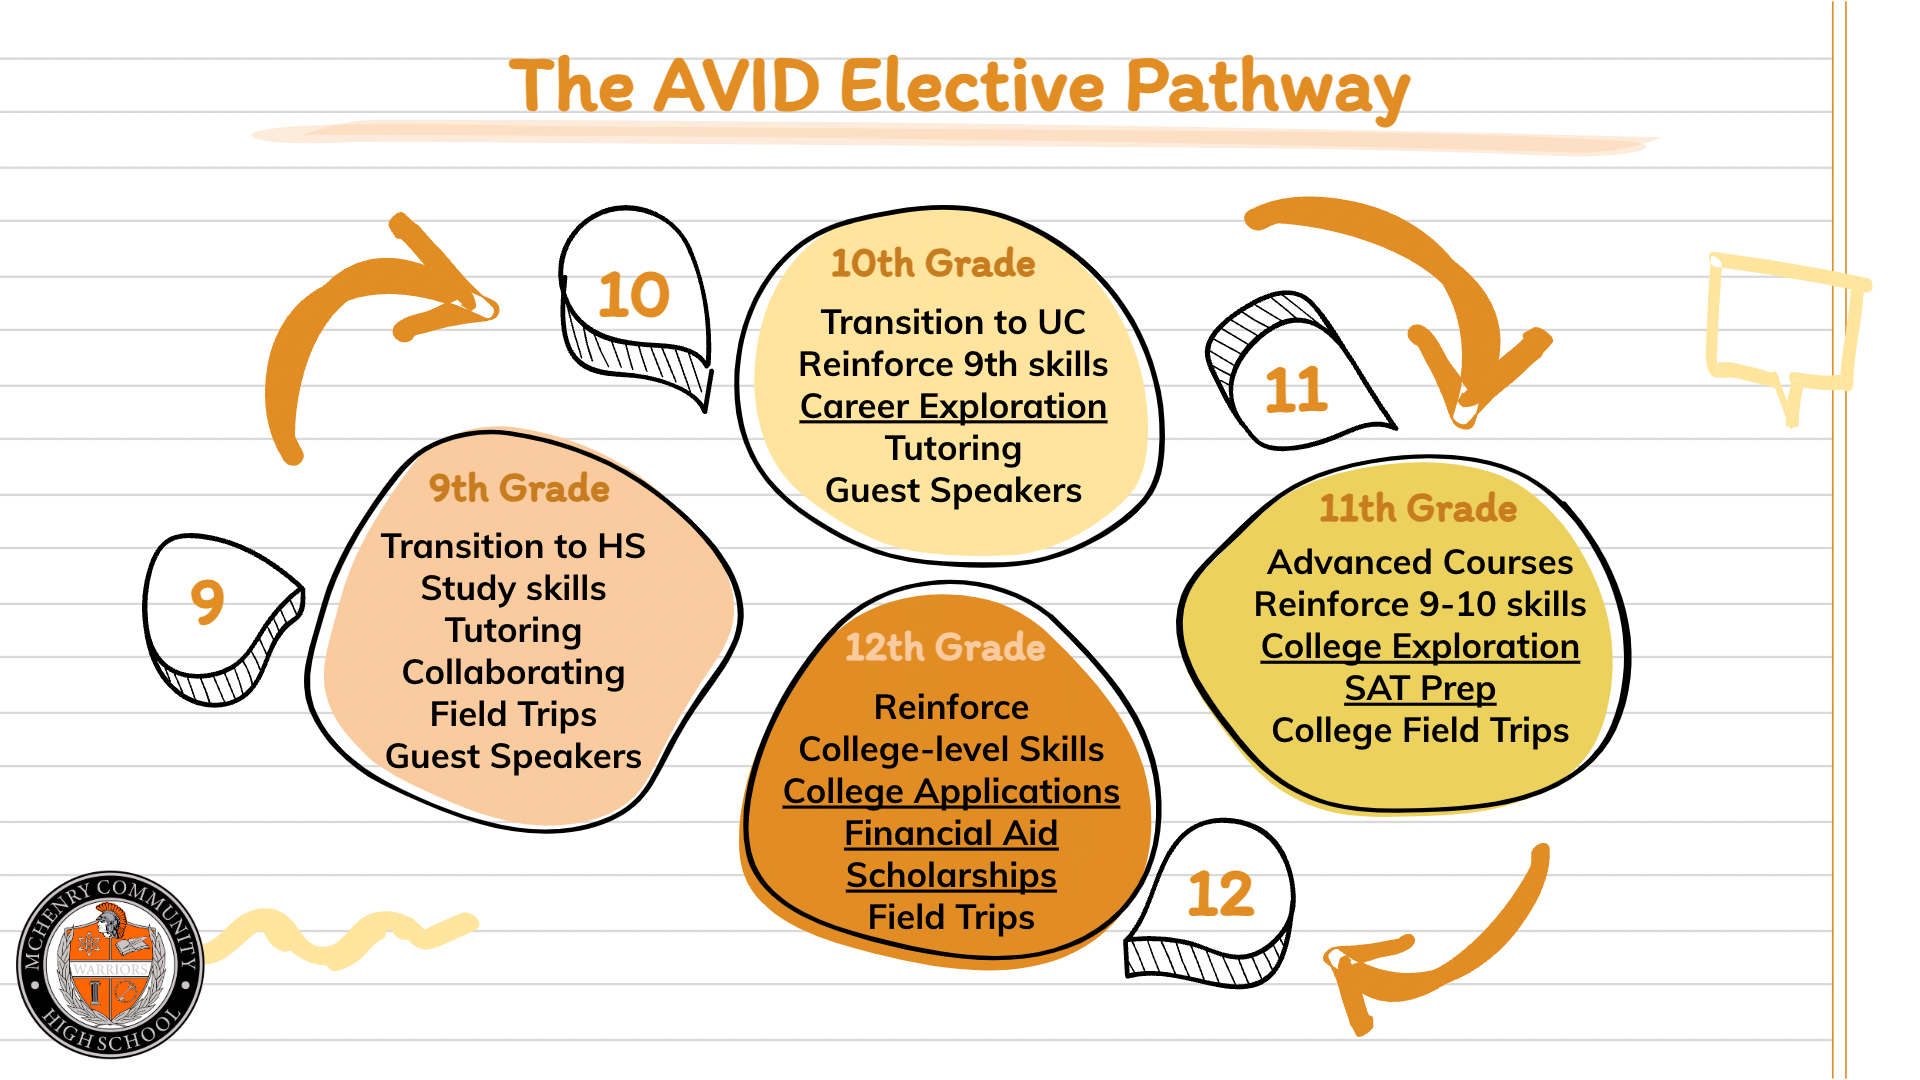 The AVID Elective Pathway 9th Grade Transition to High School, Study Skills, Tutoring, Collaborating, Field Trips, Guest Speakers. 10th Grade: Transition to Upper Campus. Reinforce 9th Skills, Career Exploration, Tutoring, Guest Speakers 11th Grade: Advanced Courses Reinforce 9-10 Skills, College Exploration, SAT Prep, College Field Trips, 12th Grade; Reinforce College-level skills, College Applications, Financial Aid, Scholarships, Field Trips